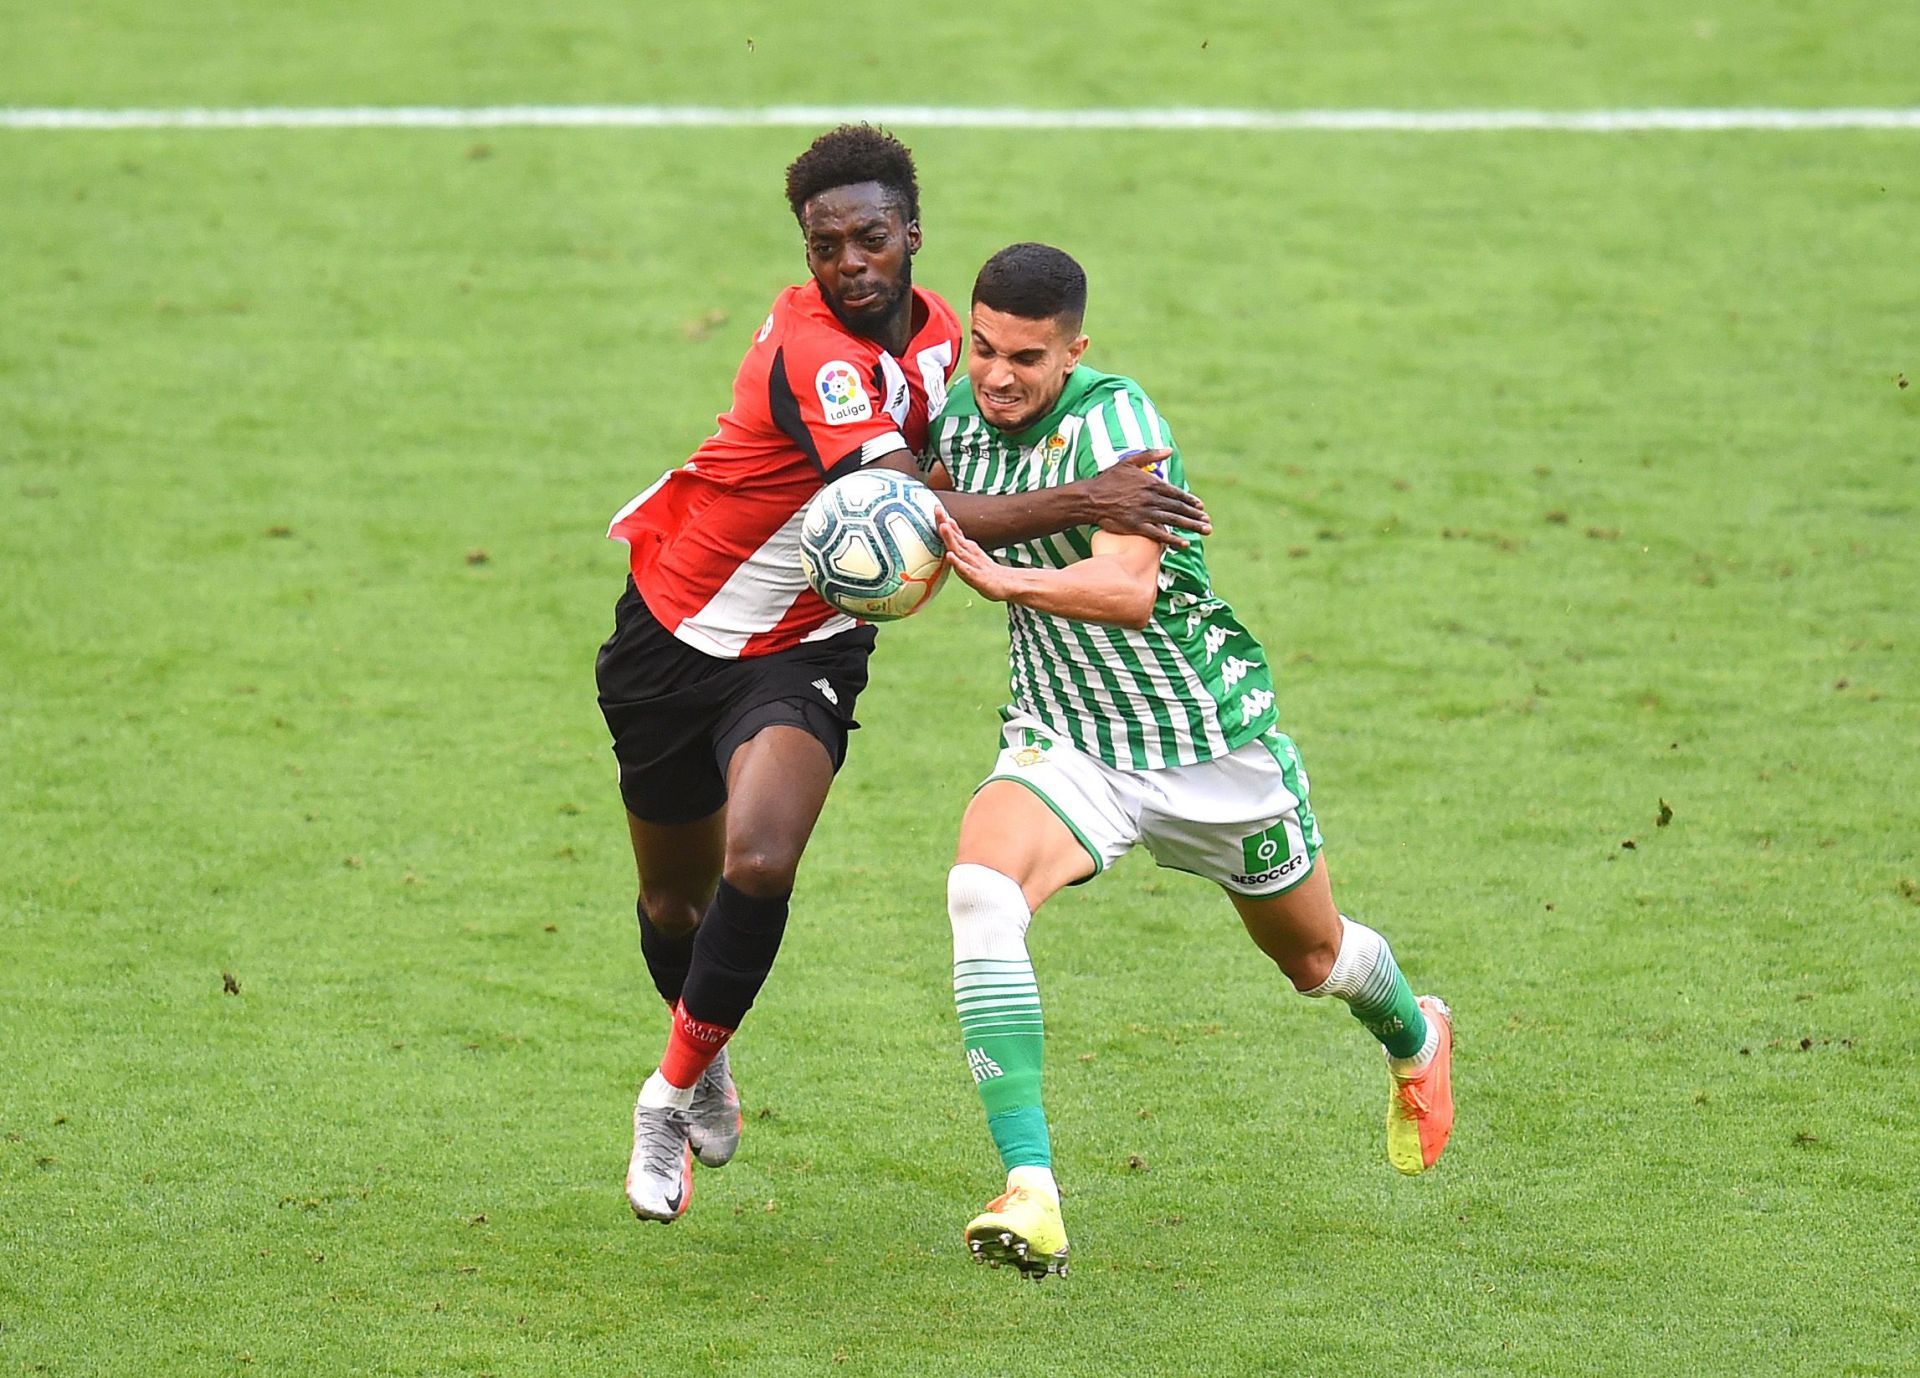 Athletic Bilbao take on Real Betis this weekend